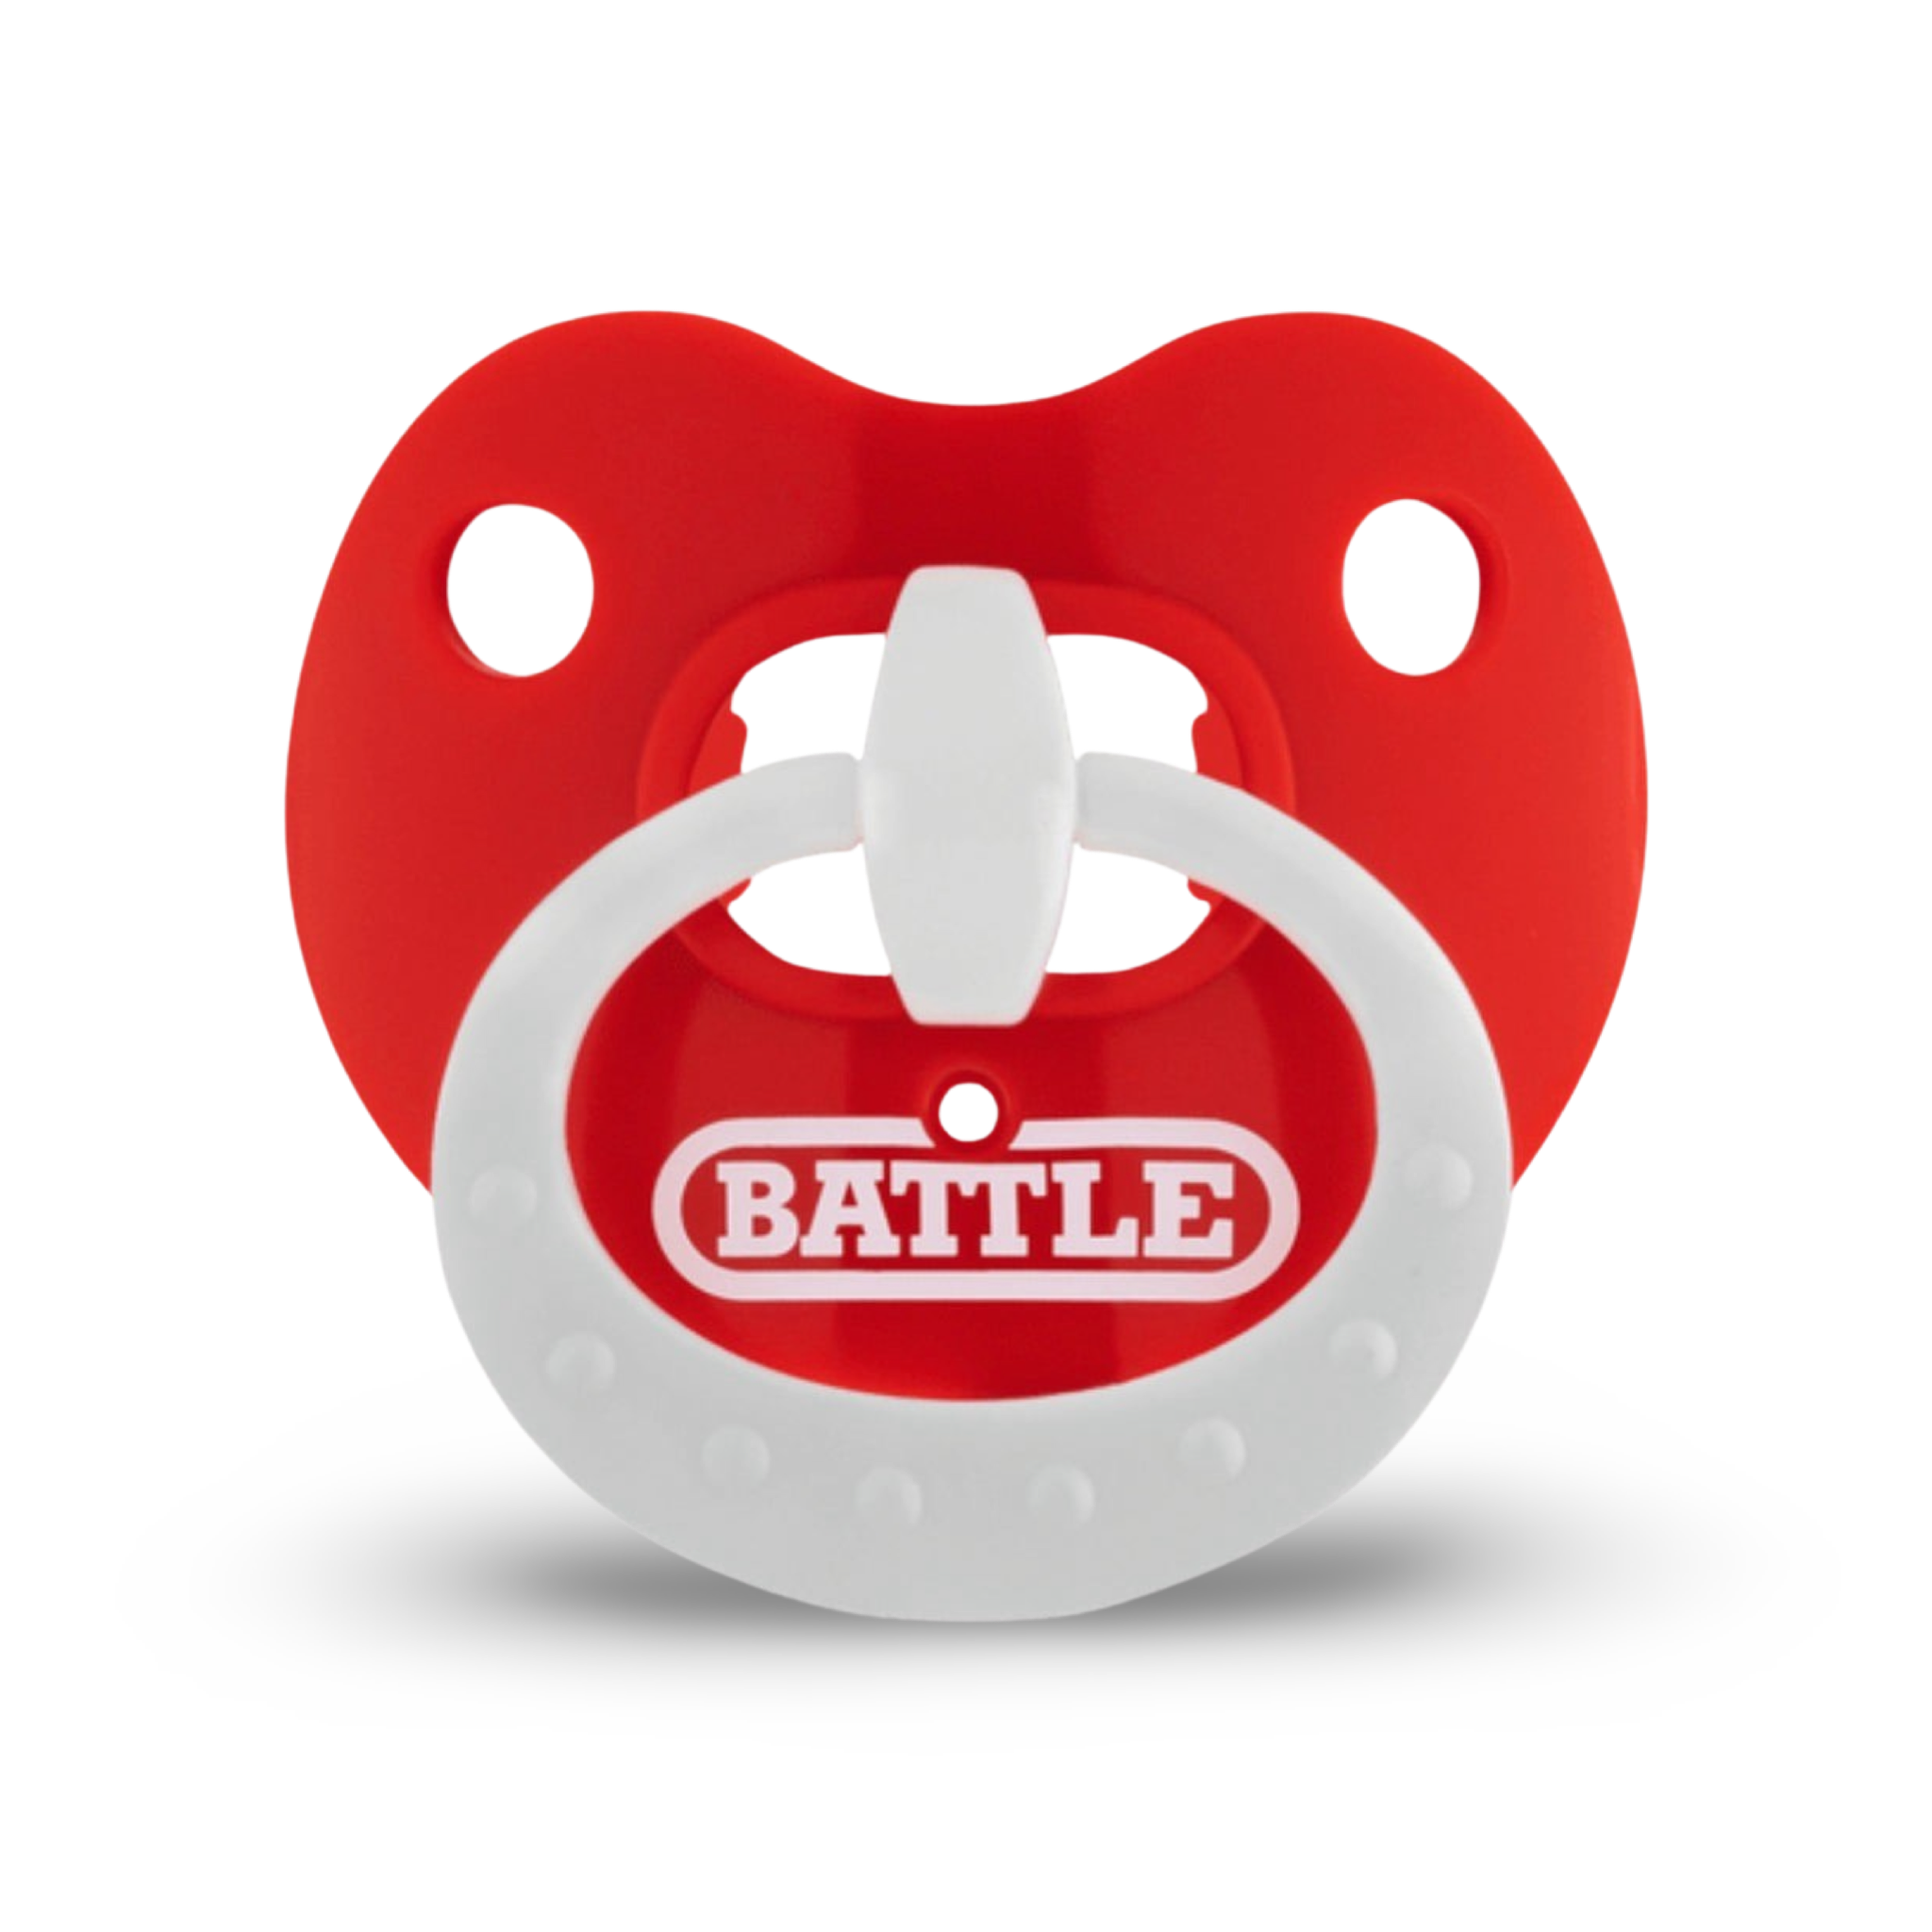 Battle "Binky" Oxygen Football Mouthguard - Red/White Protecteur buccal